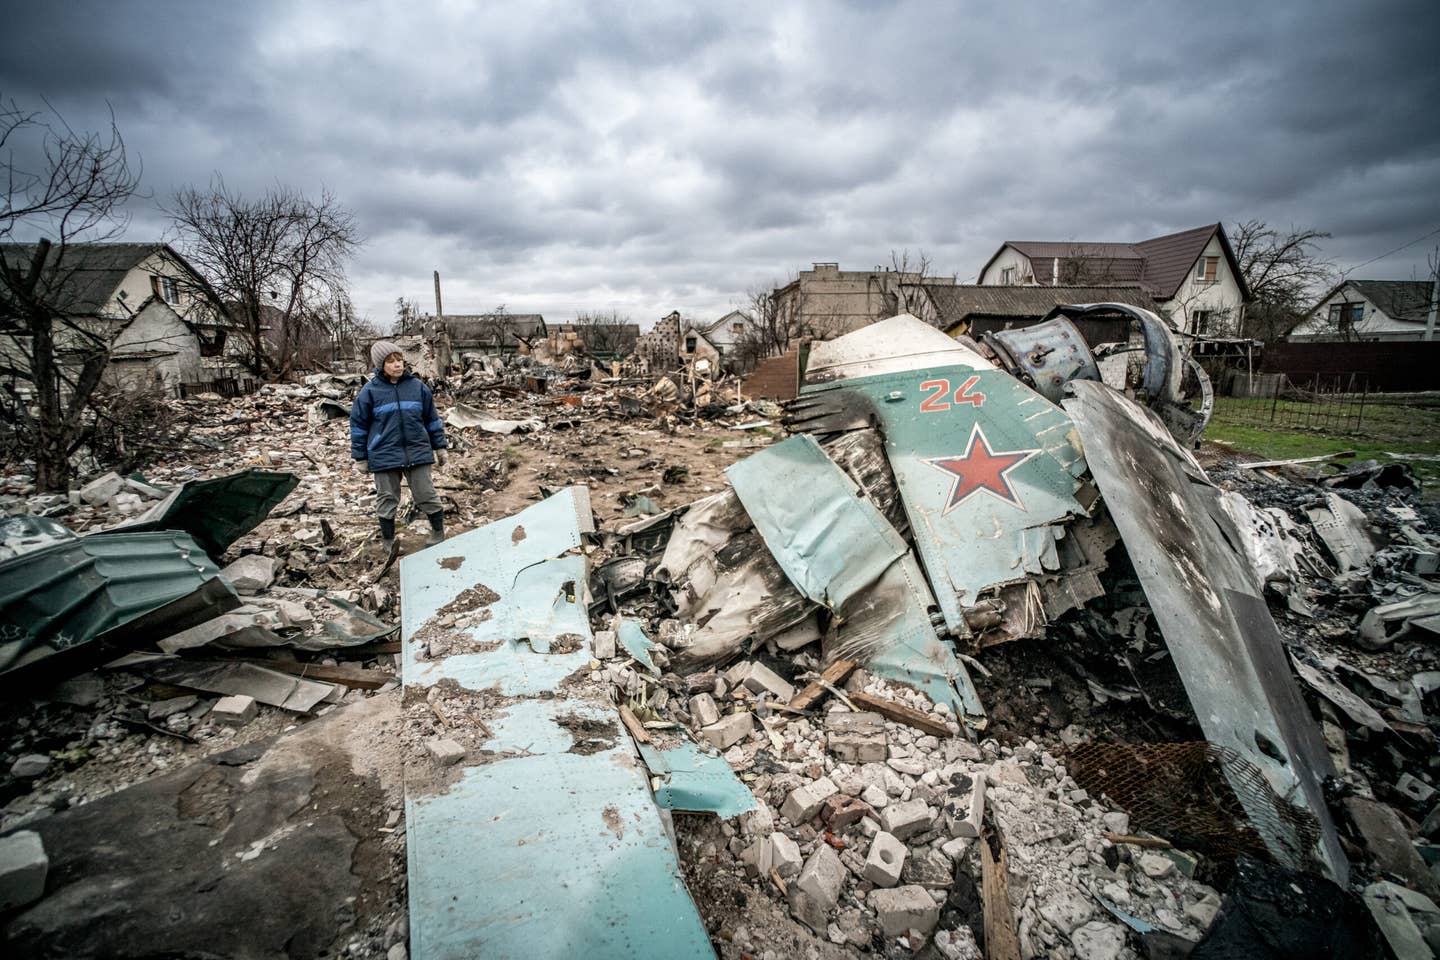 A Su-34 shot down by Ukrainian anti-aircraft guns over a residential area of Chernihiv in April 2022. <em>Photo by Nicola Marfisi/AGF/Universal Images Group via Getty Images</em>